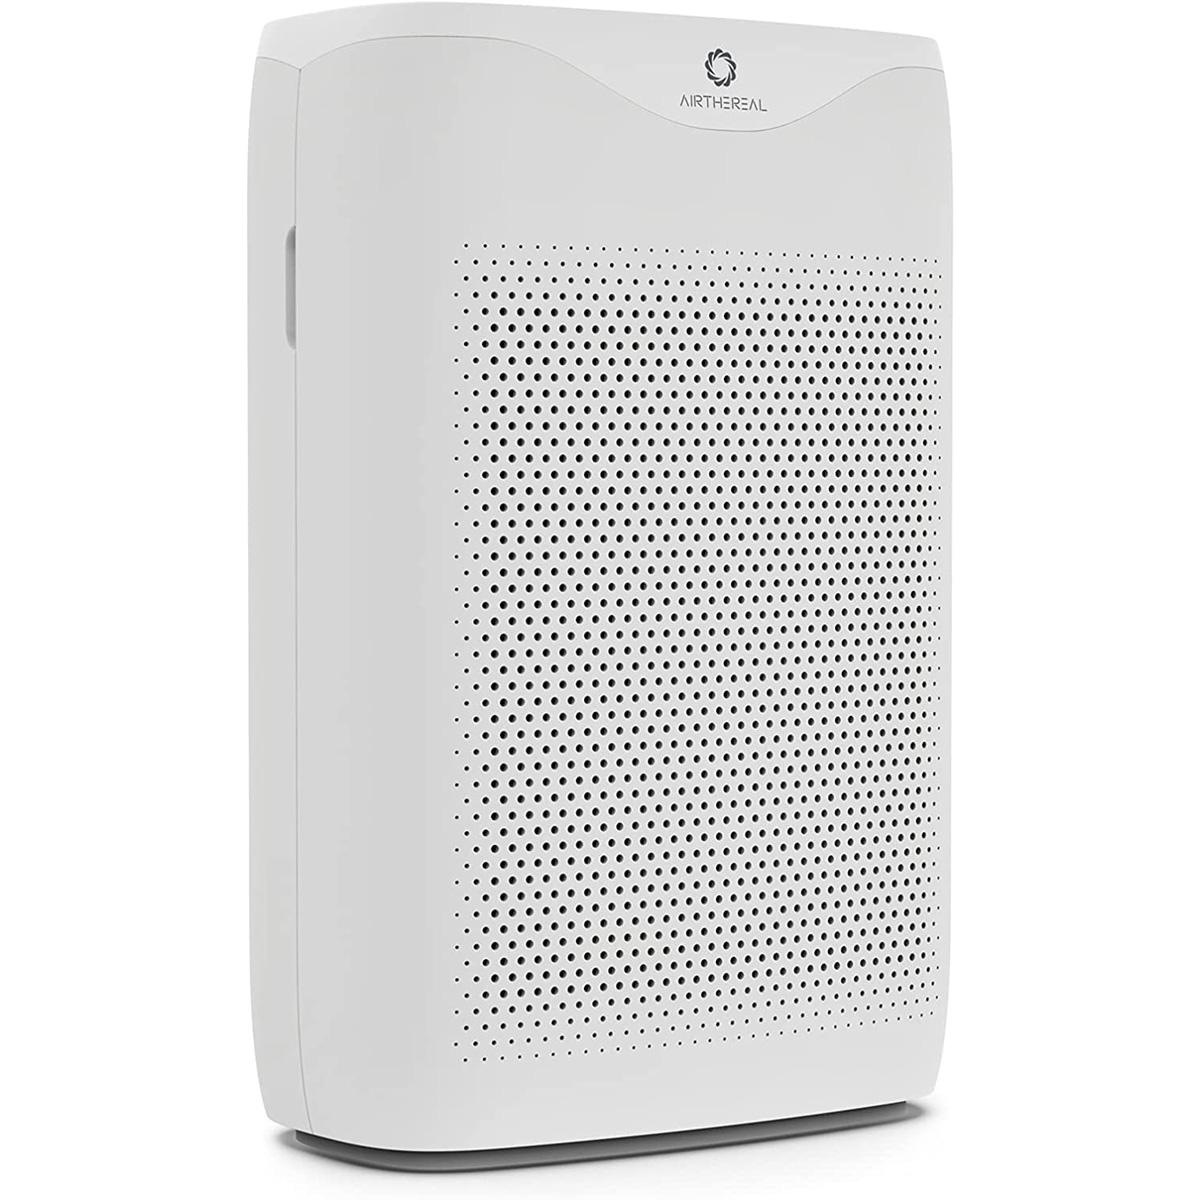 Airthereal APH230C HEPA Filter Air Purifier for $69.99 Shipped